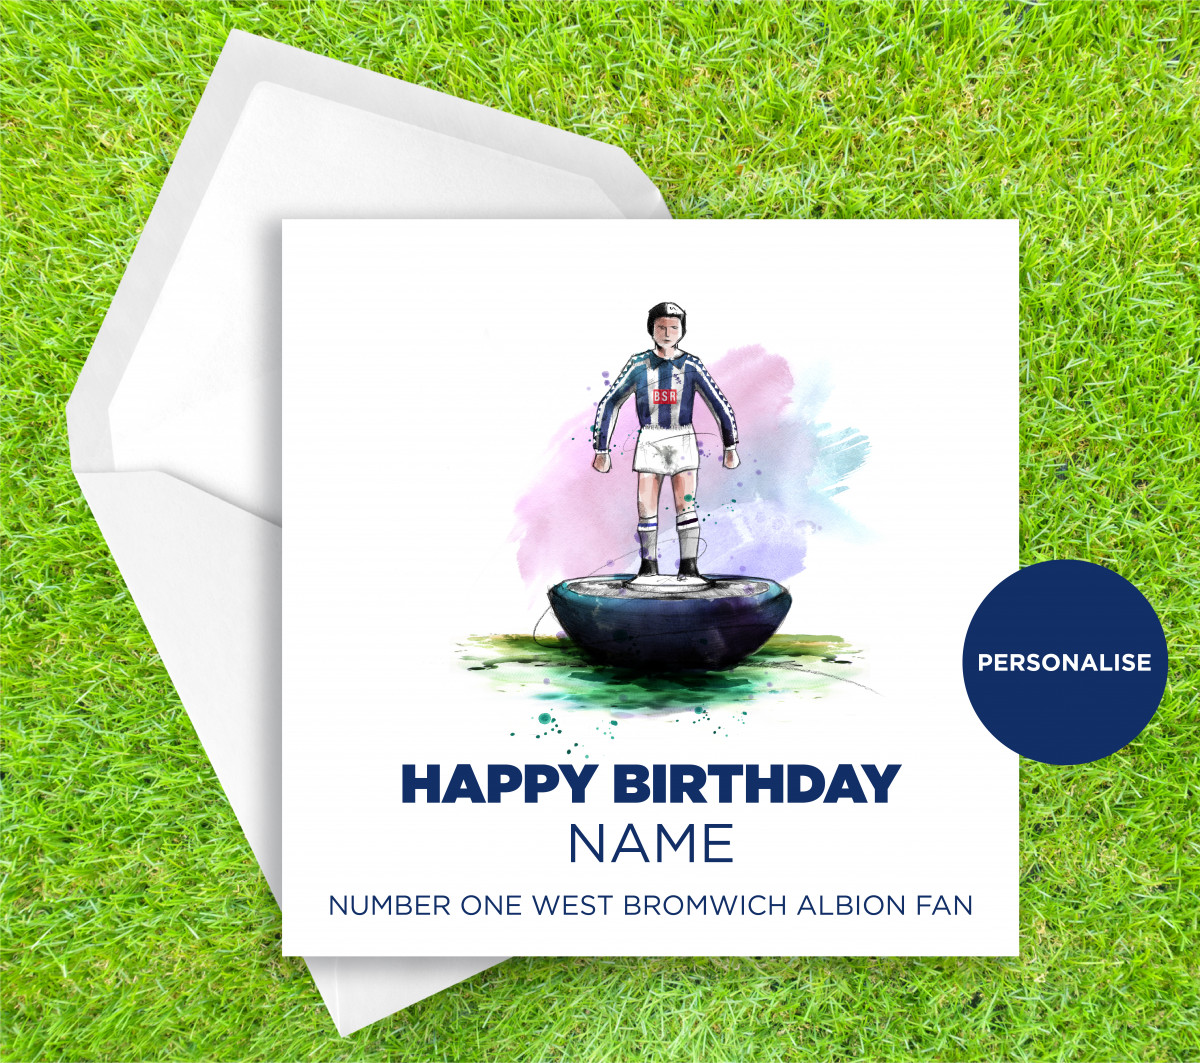 West Bromwich Albion, Subbuteo, personalised birthday card